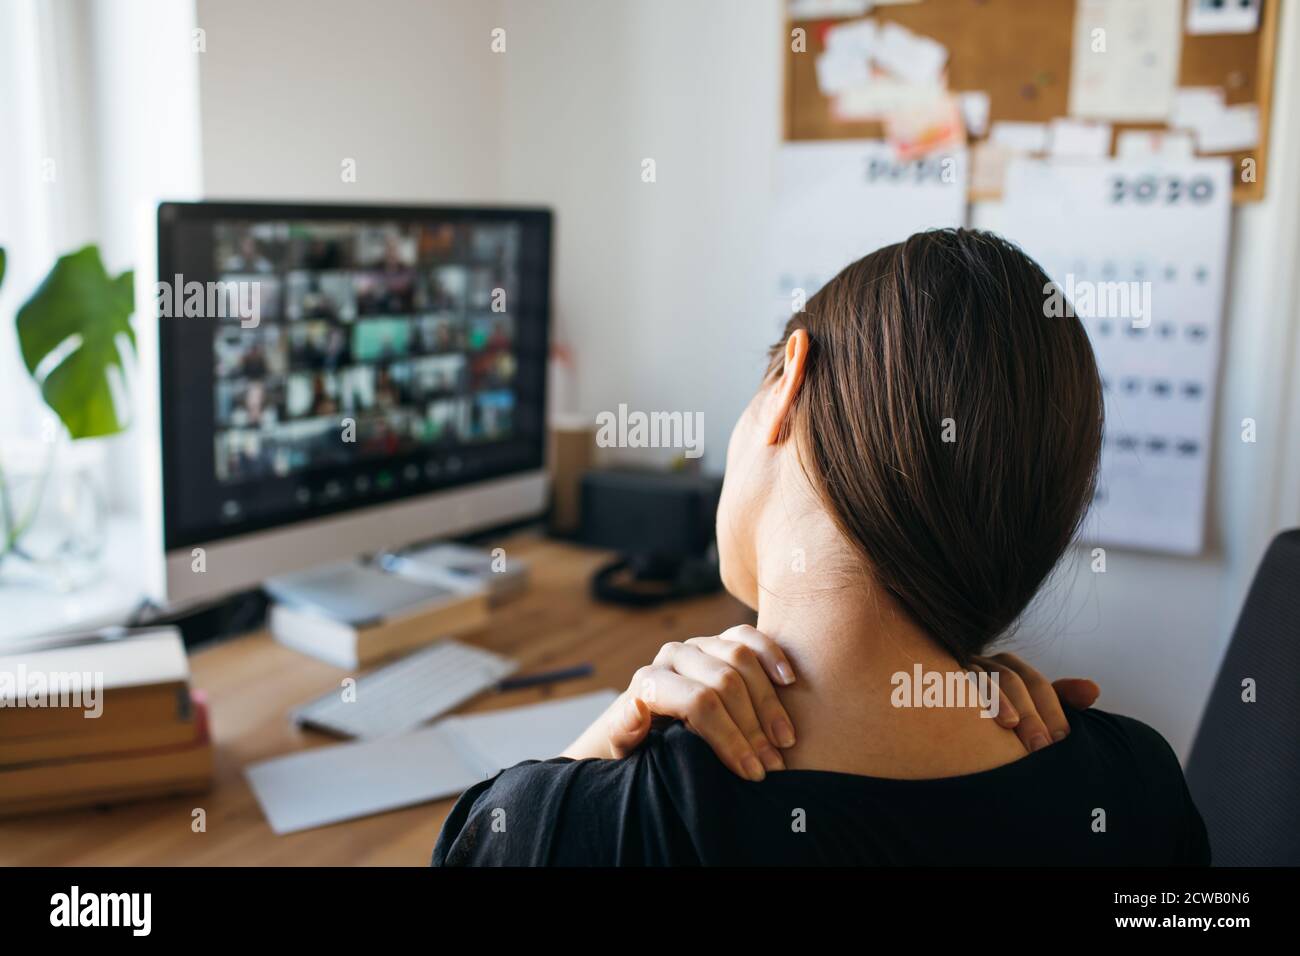 Young Woman with neck pain after long working hours in home office. Release tension in your neck. Stock Photo